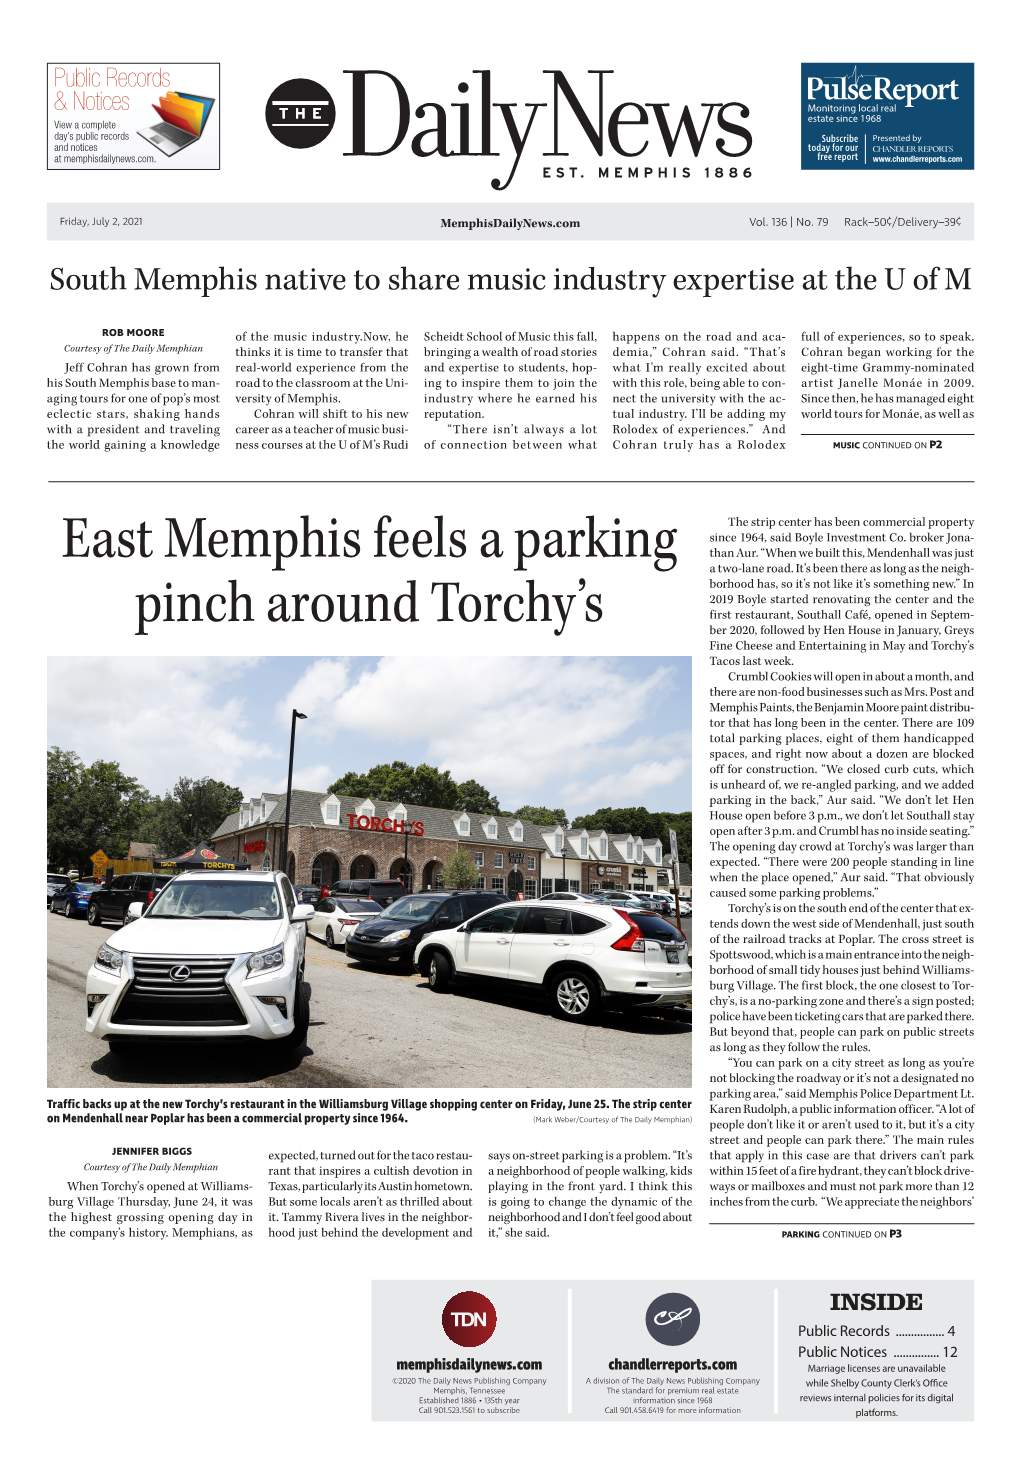 East Memphis Feels a Parking Pinch Around Torchy's